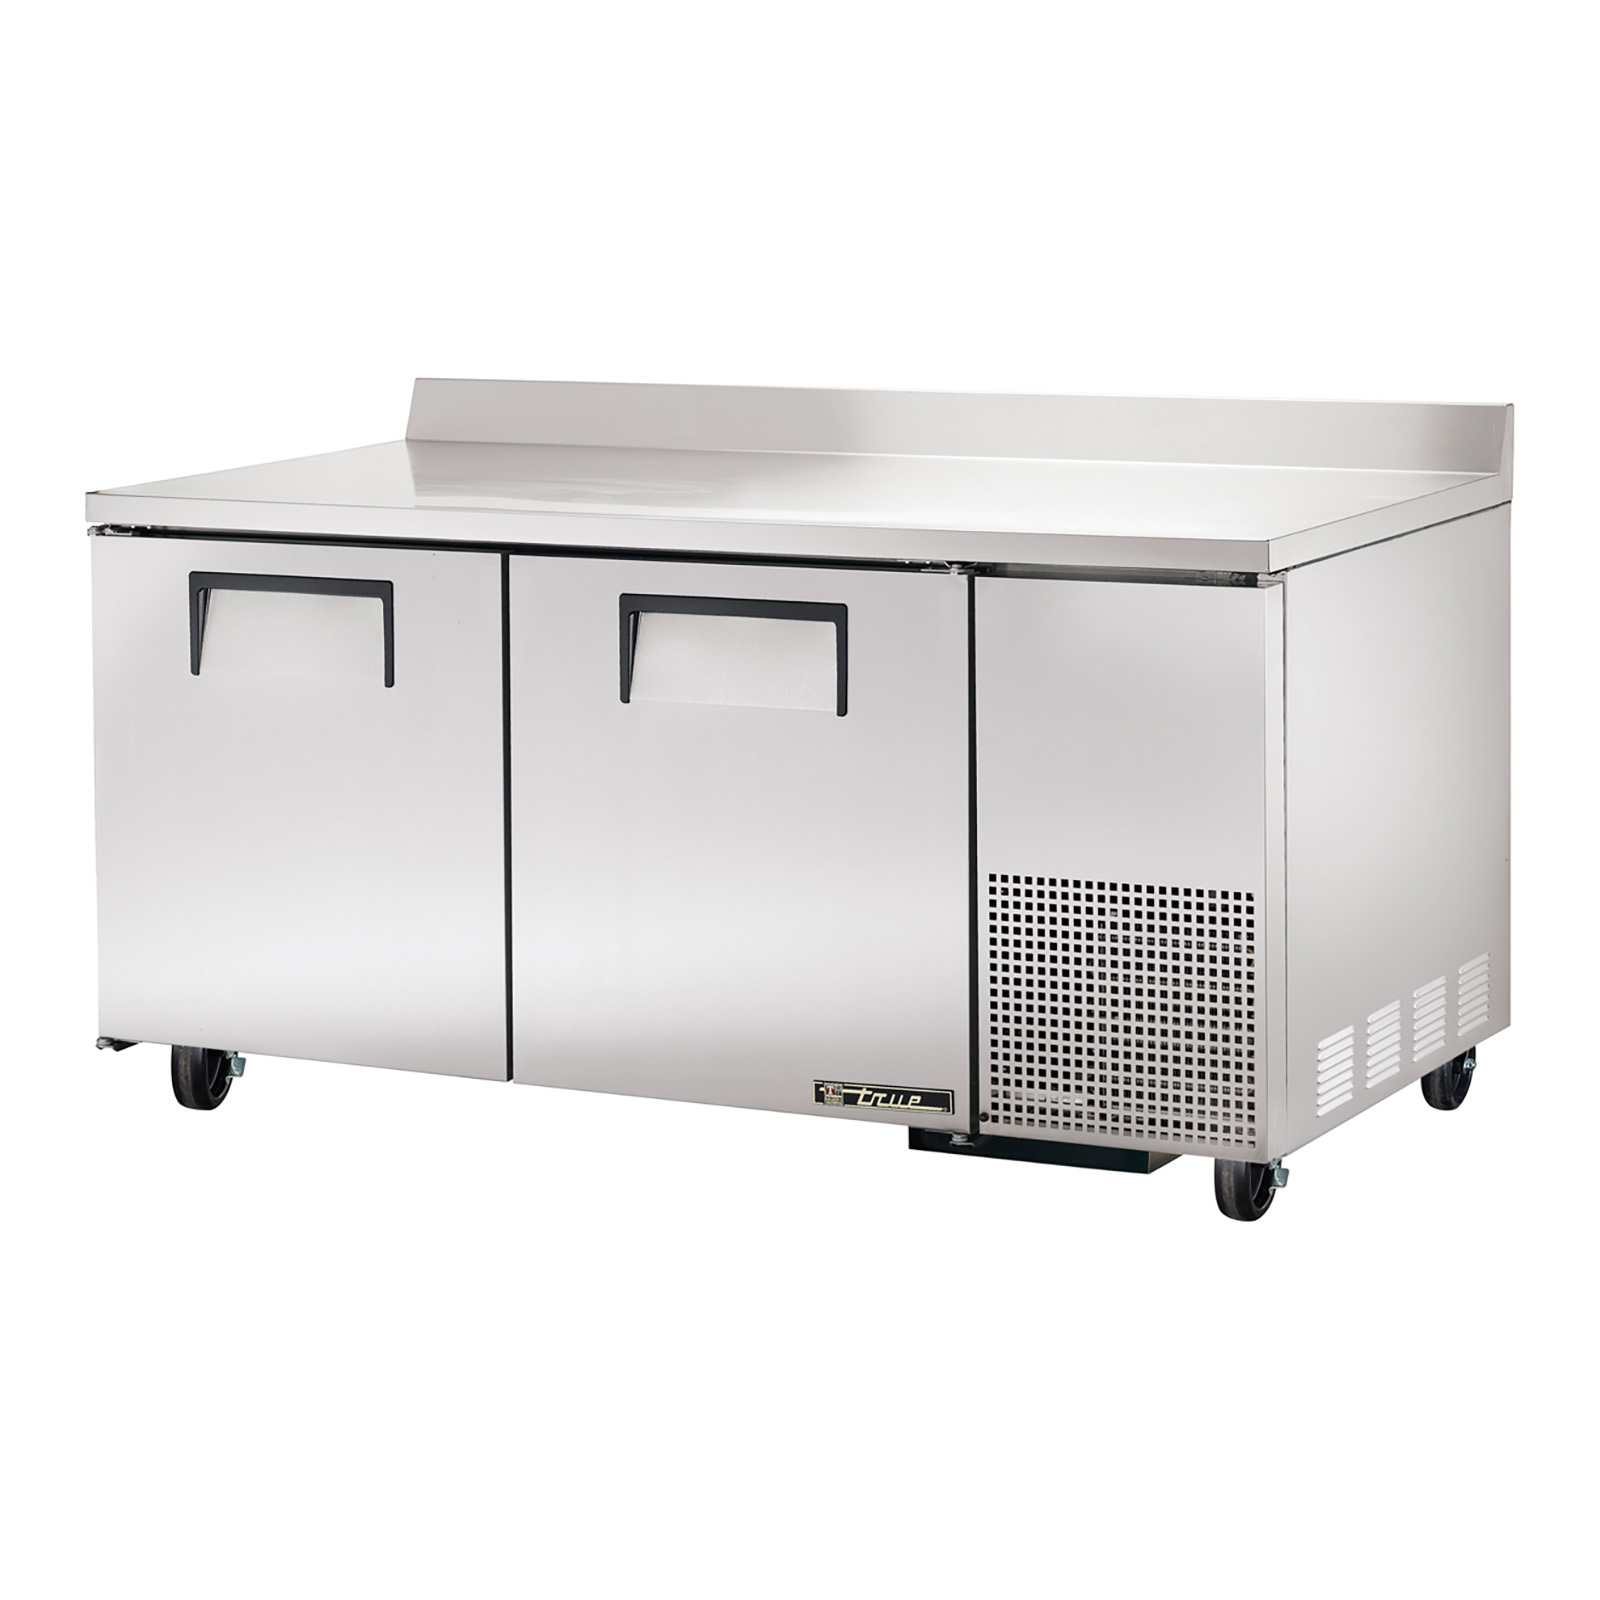 True Food Service Equipment TWT-67 Refrigerated Counter, Work Top